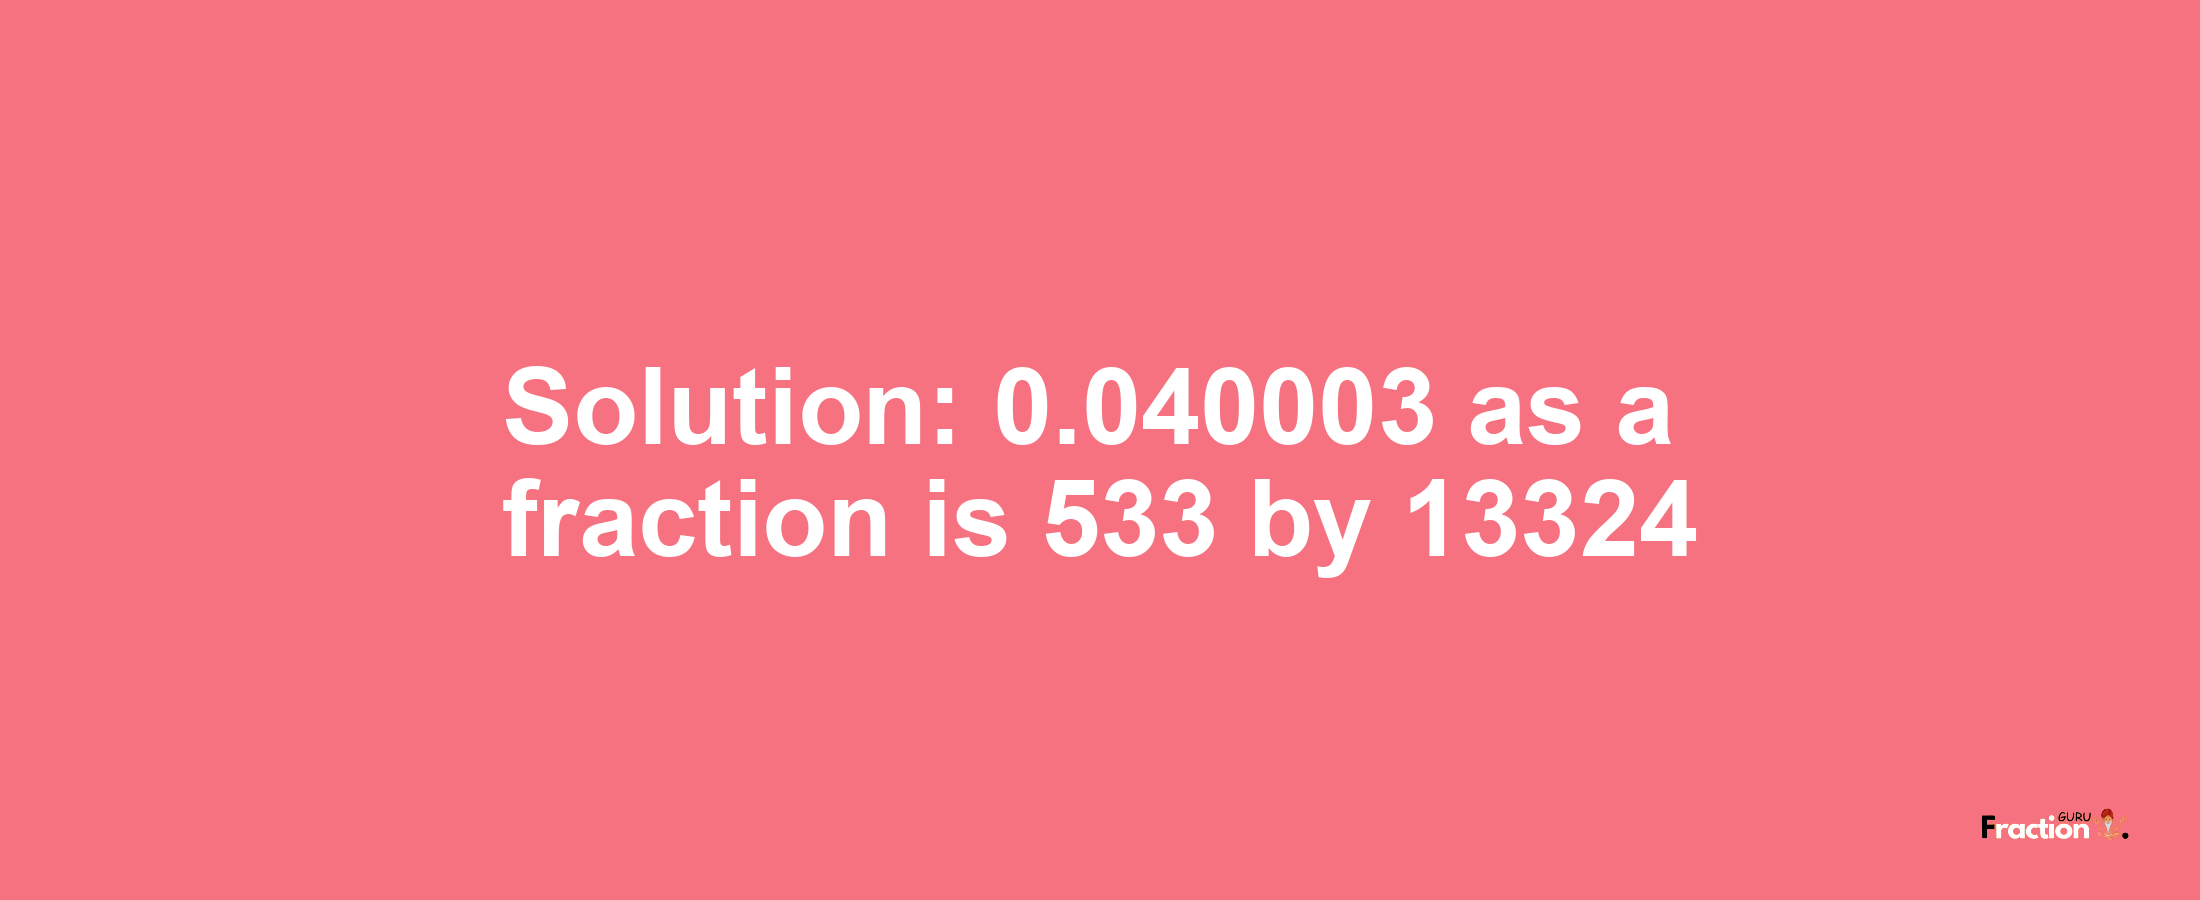 Solution:0.040003 as a fraction is 533/13324